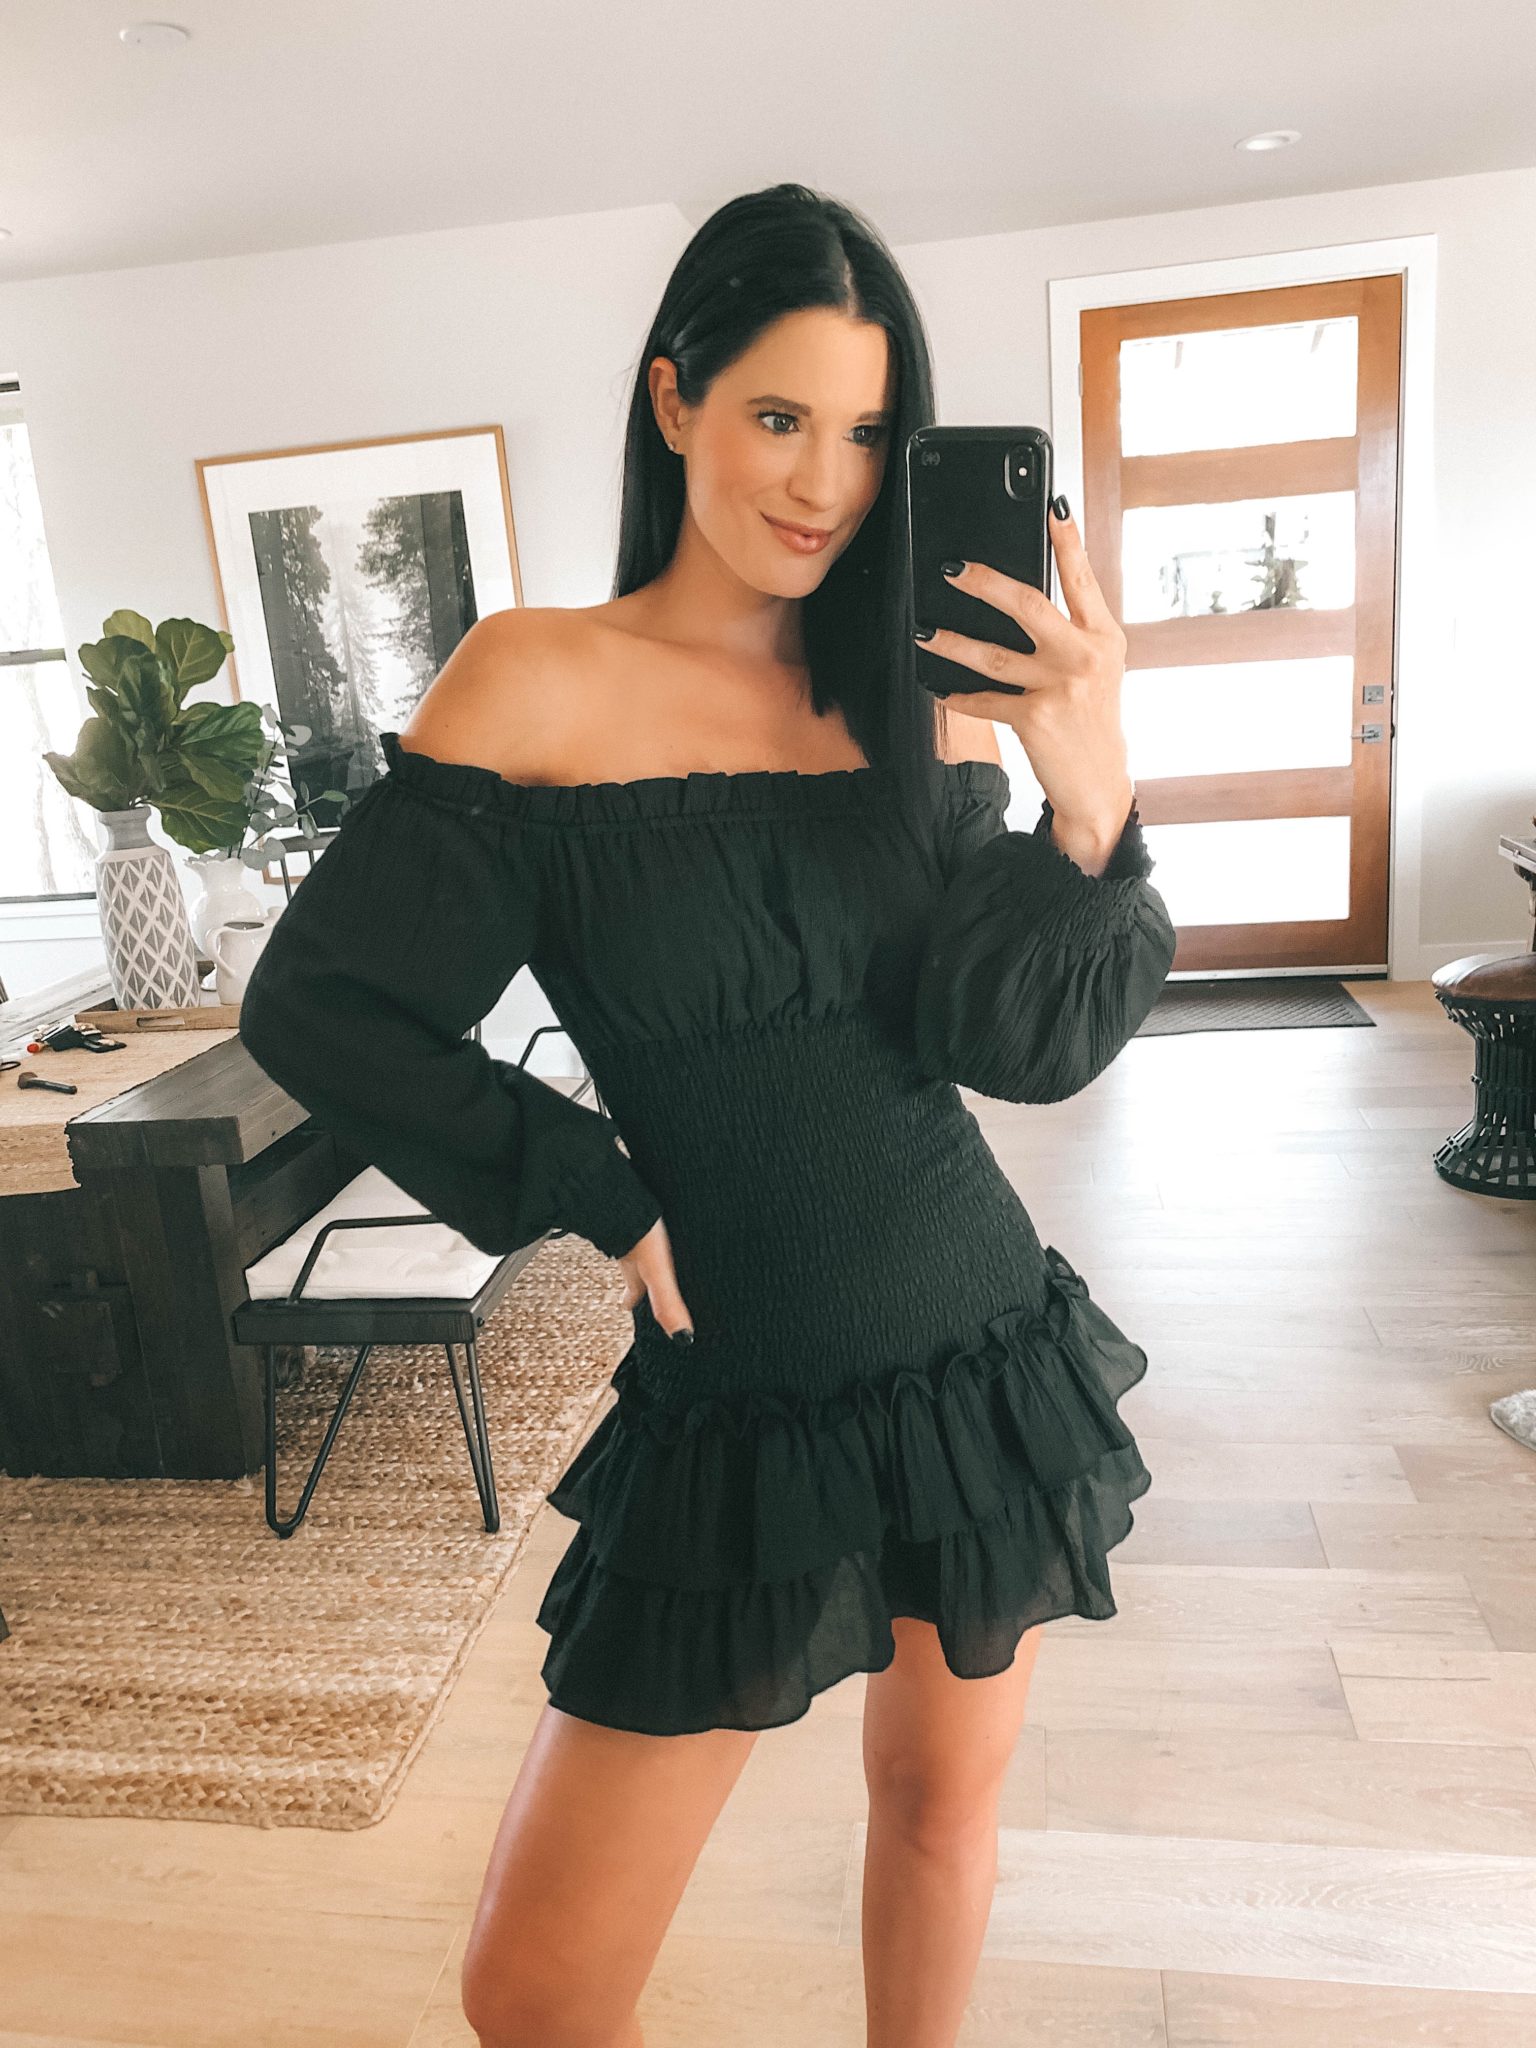 Transition Your Summer Looks Into Fall with Princess Polly Clothing by popular Austin fashion blog, Dressed to Kill: image of a woman wearing a Princess Polly black Flinders Mini Dress.